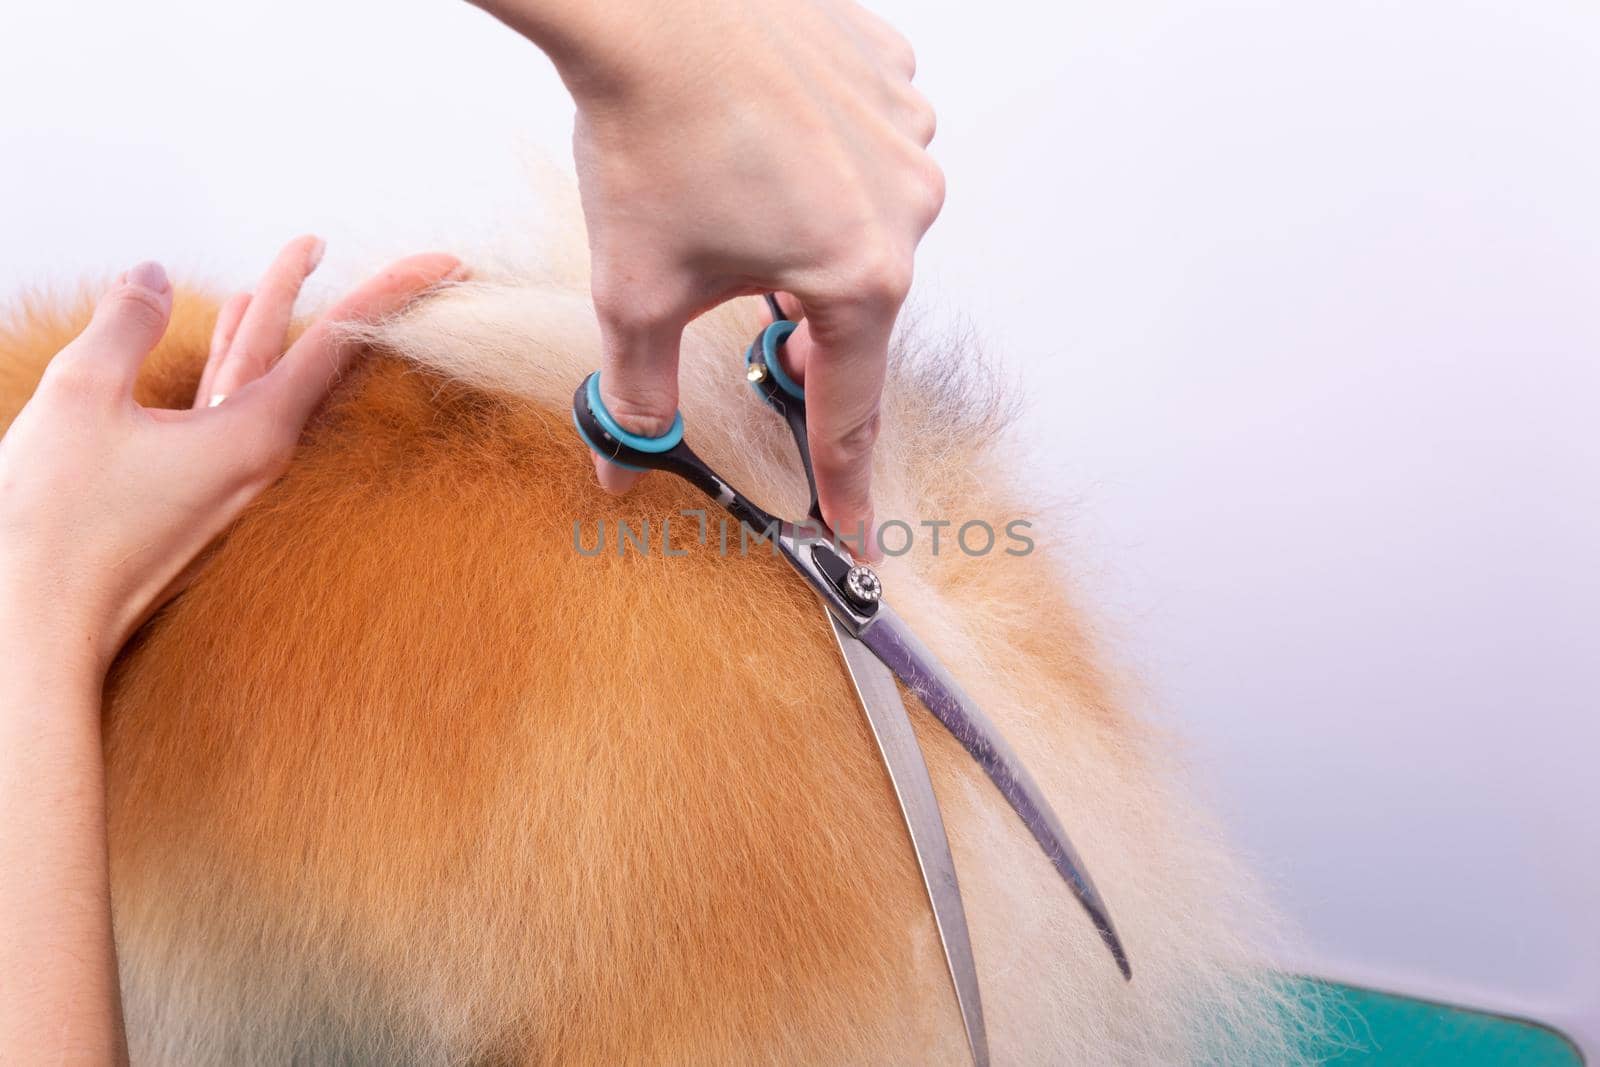 Professional groomer takes care of Orange Pomeranian Spitz in animal beauty salon. by BY-_-BY